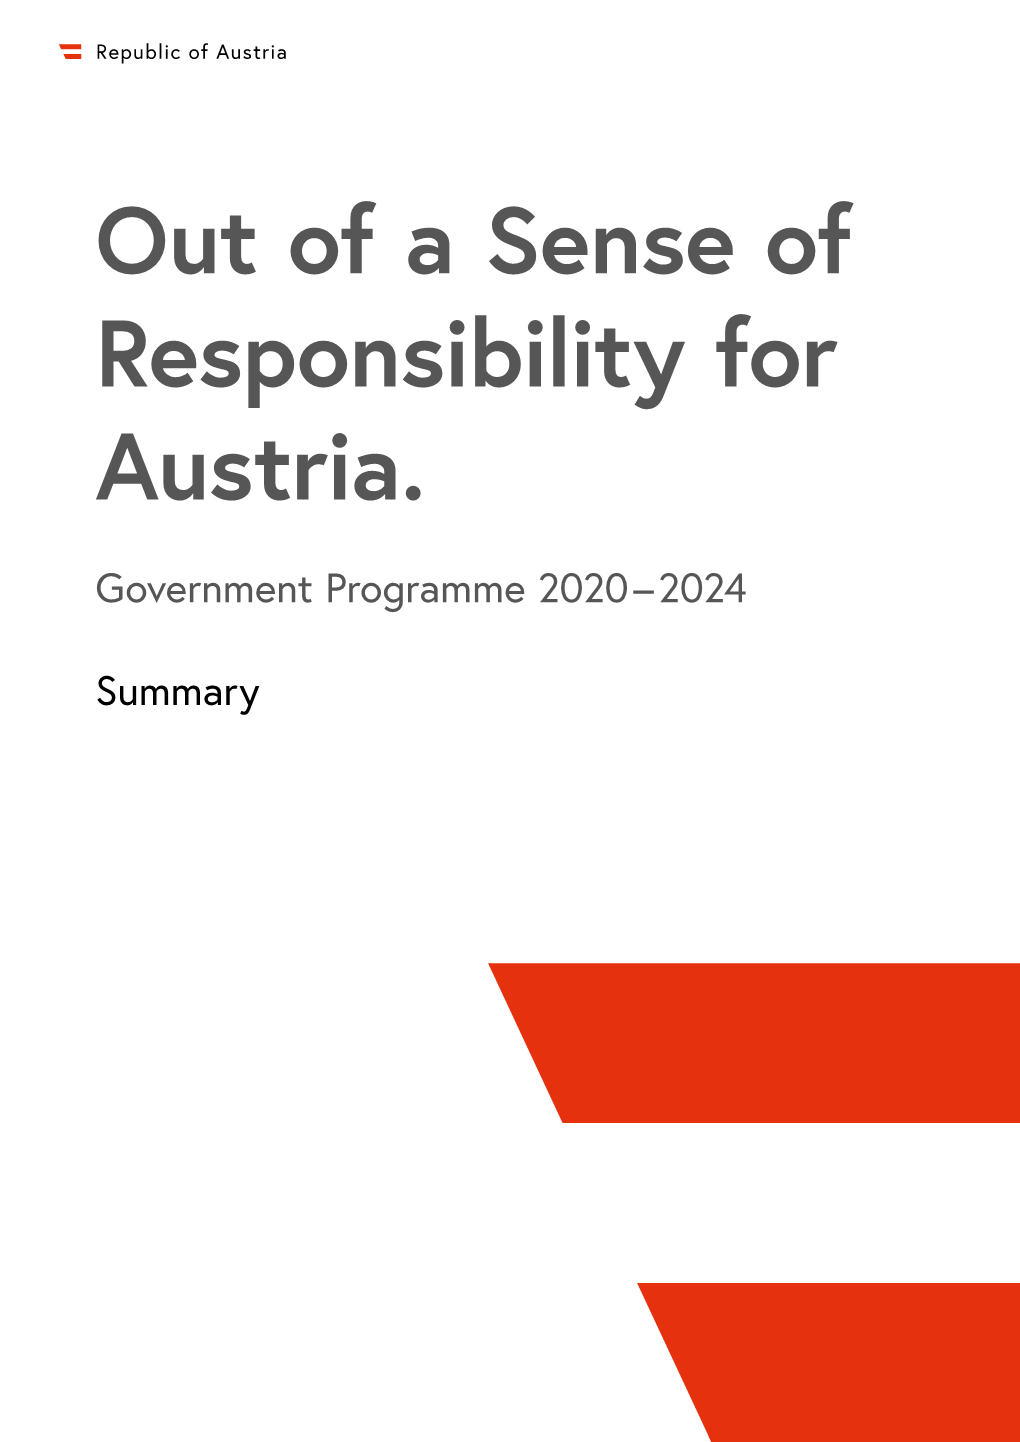 Out of a Sense of Responsibility for Austria